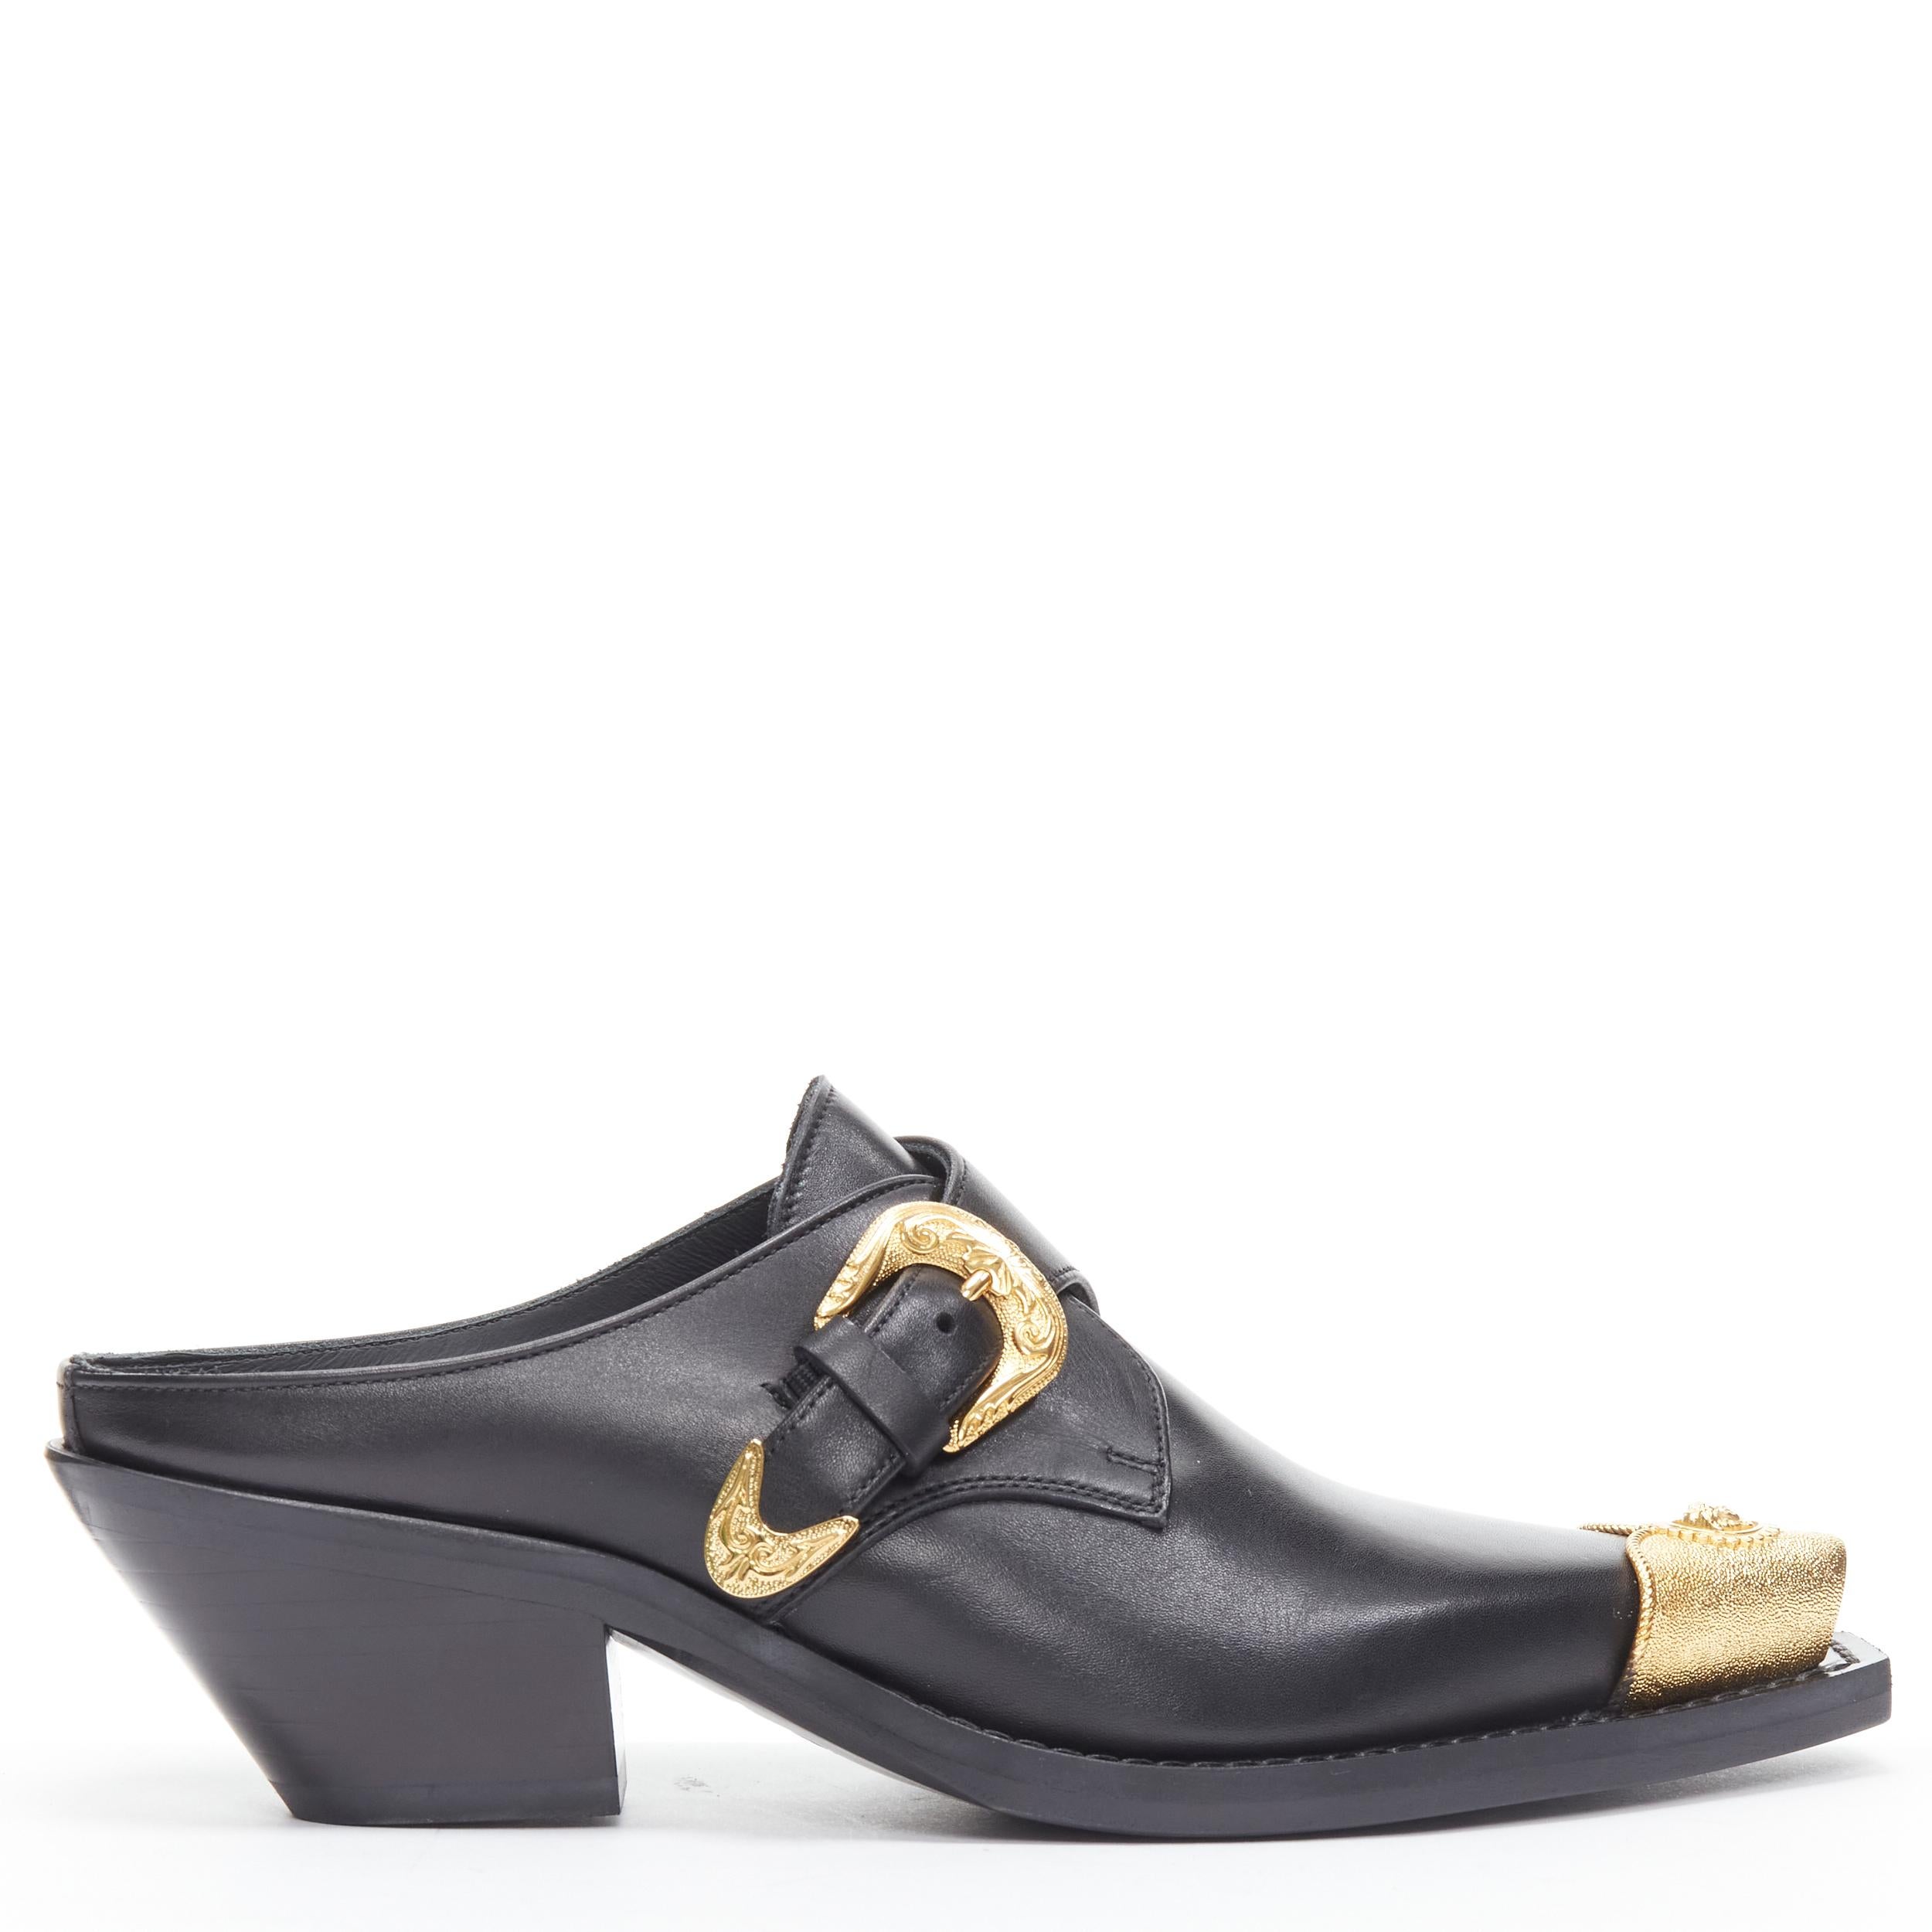 new VERSACE 2019 black leather gold Medusa toe western buckle cuban mule EU37 
Reference: TGAS/B01897 
Brand: Versace 
Designer: Donatella Versace 
Model: Metal toe mule 
Collection: 2019 Fall Winter Runway 
Material: Leather 
Color: Black 
Pattern: